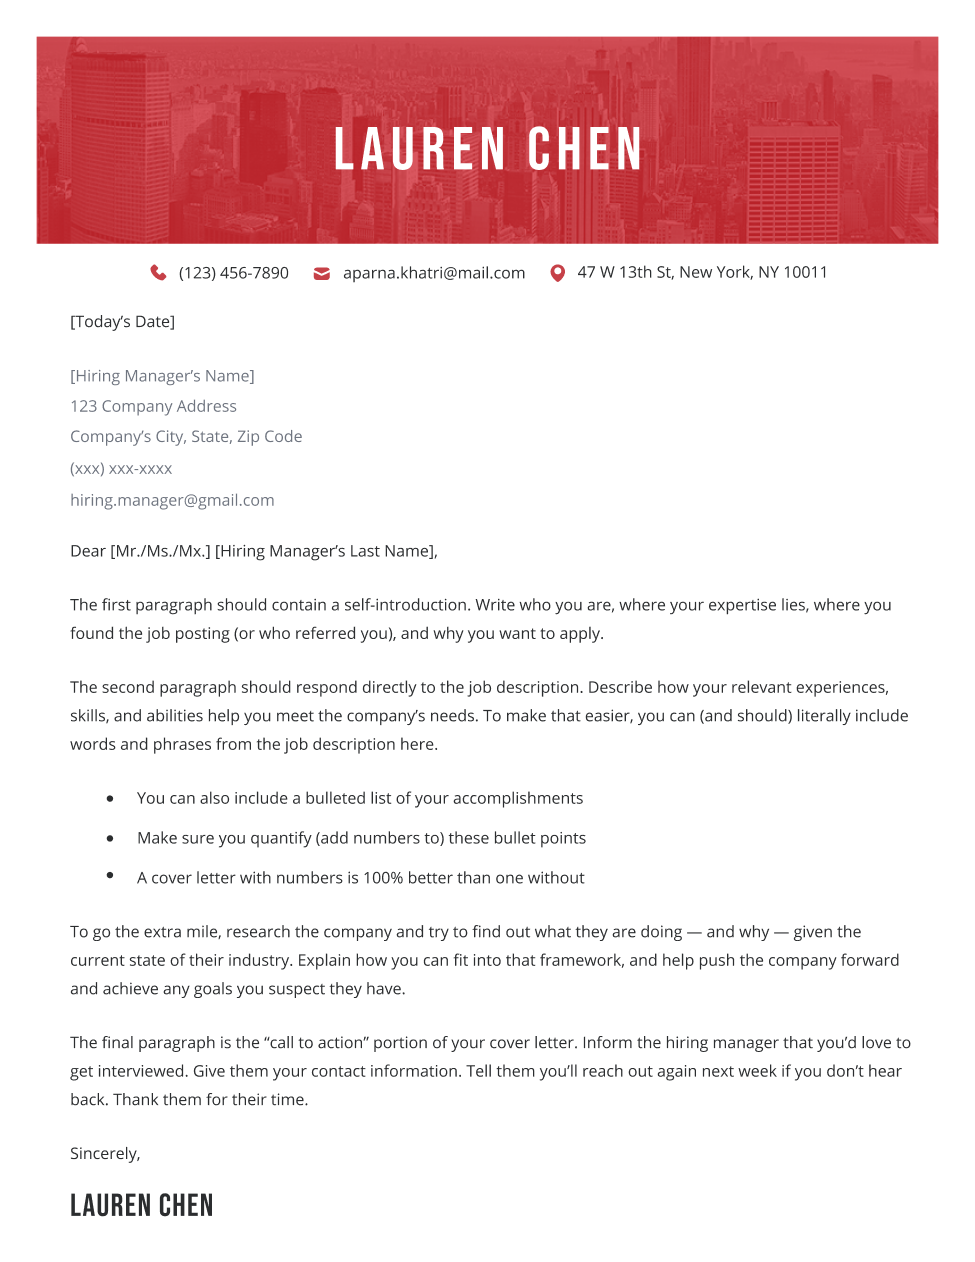 Majestic cover letter template in red, featuring an image of a cityscape in the background of the header.